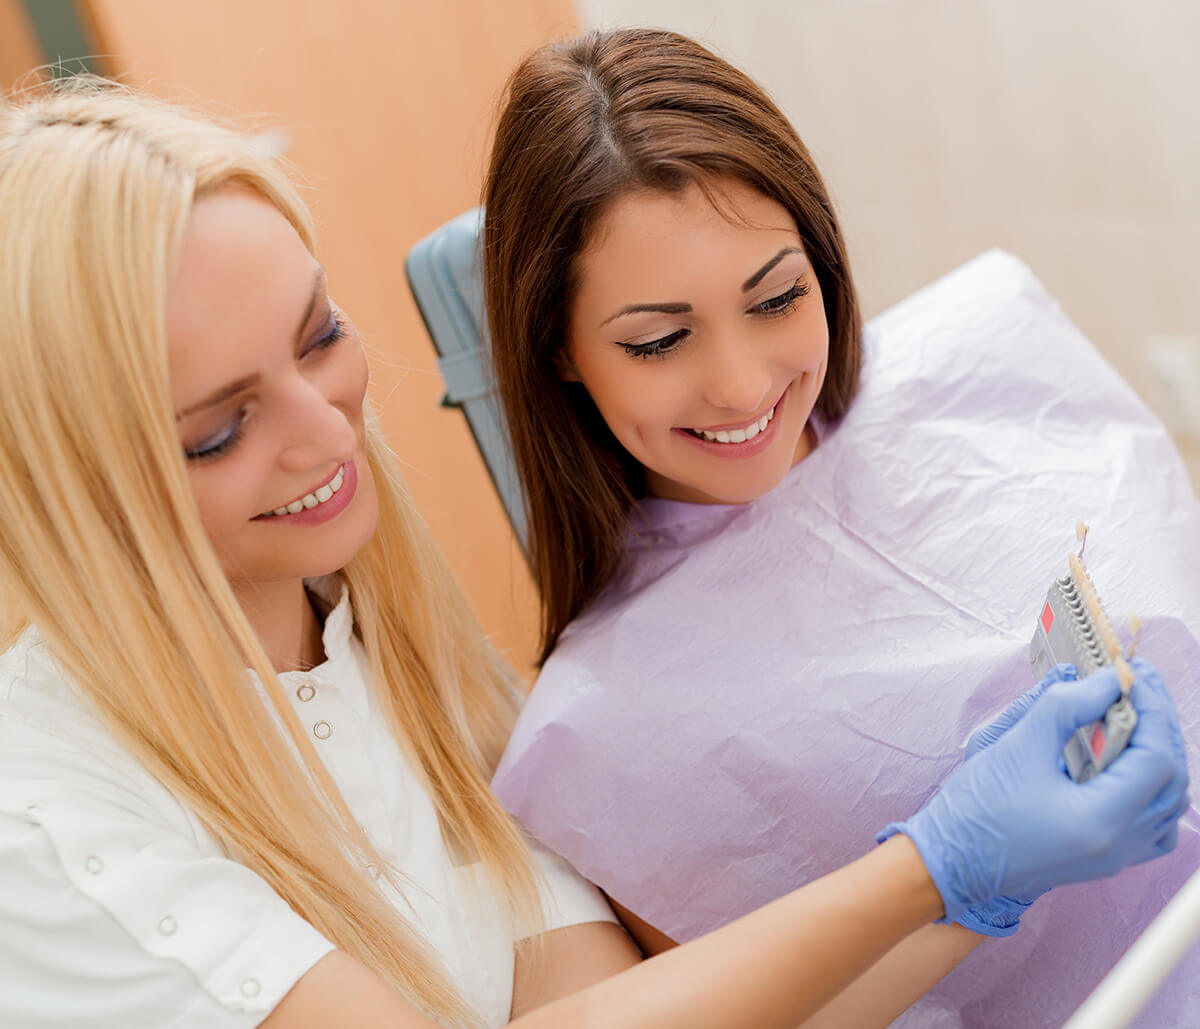 In Pembroke Pines Area Dentist Explains How Dental Veneers Can Improve the Appearance of Your Smile